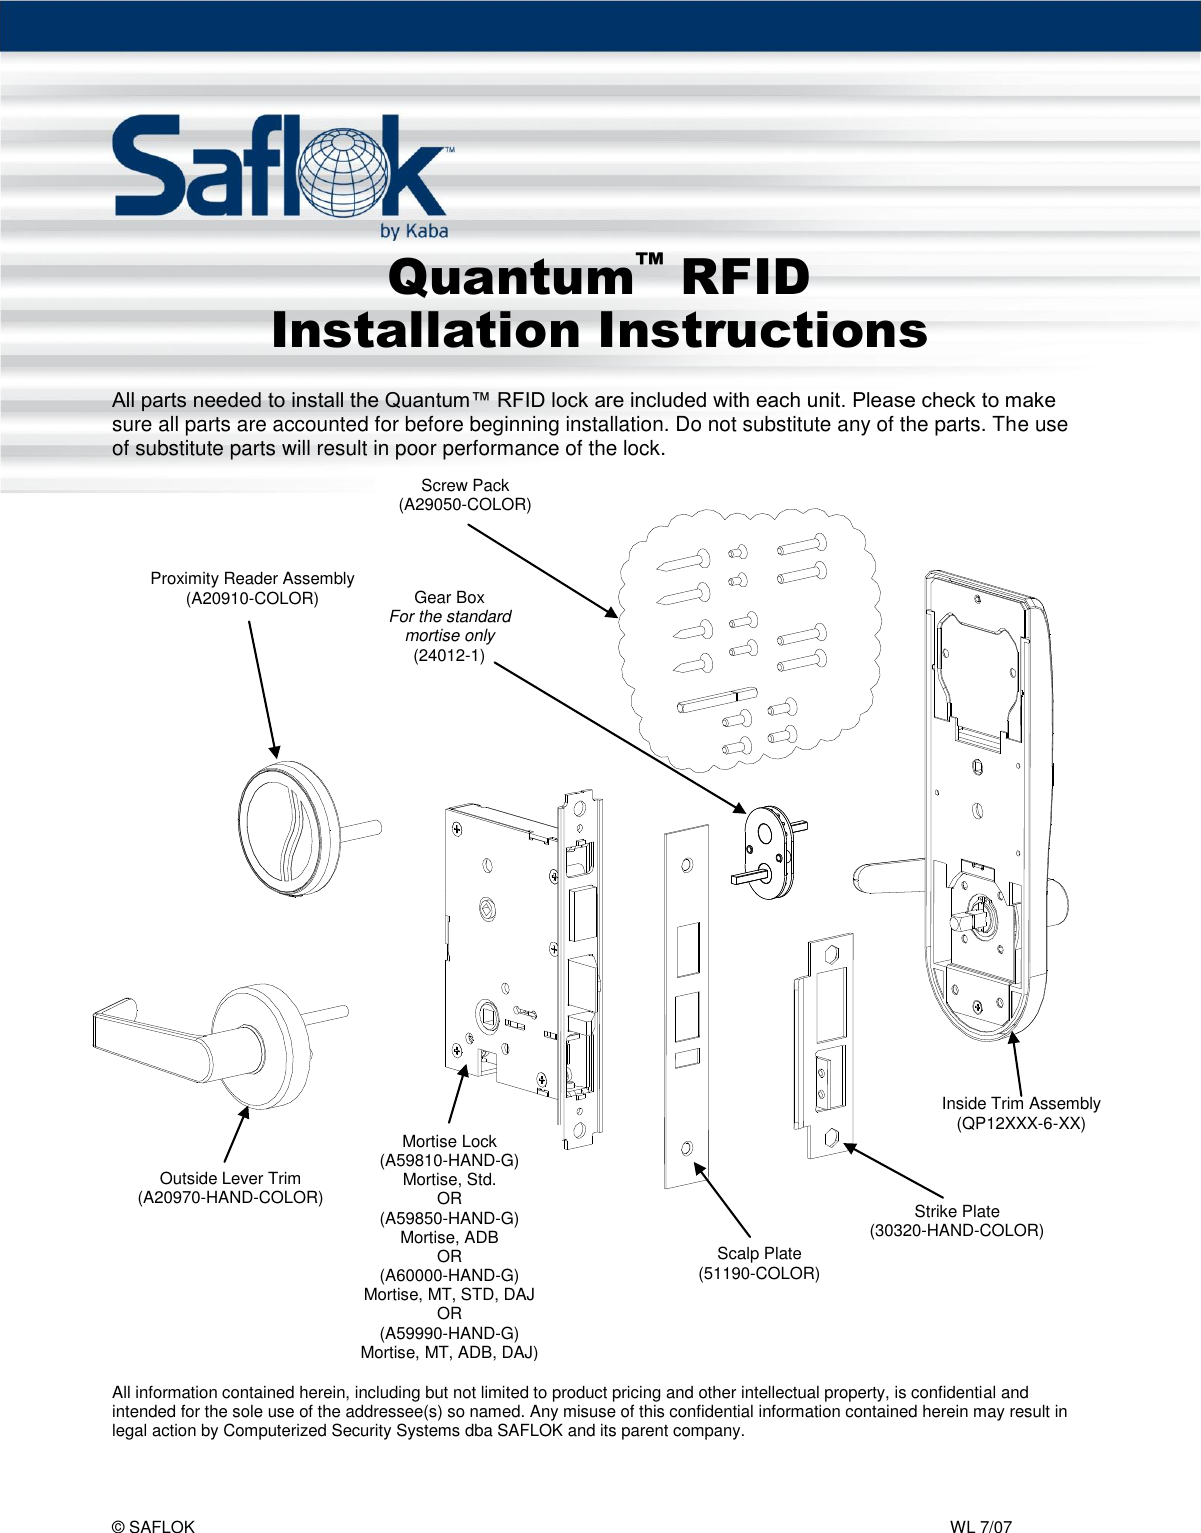 Quantum™ RFID  Pg. 1 of 6 © SAFLOK    WL 7/07   Outside Lever Trim (A20970-HAND-COLOR)  Mortise Lock (A59810-HAND-G) Mortise, Std. OR (A59850-HAND-G) Mortise, ADB OR (A60000-HAND-G) Mortise, MT, STD, DAJ OR (A59990-HAND-G) Mortise, MT, ADB, DAJ) Scalp Plate (51190-COLOR) Strike Plate (30320-HAND-COLOR) Inside Trim Assembly (QP12XXX-6-XX)      Quantum™ RFID Installation Instructions  All parts needed to install the Quantum™ RFID lock are included with each unit. Please check to make sure all parts are accounted for before beginning installation. Do not substitute any of the parts. The use of substitute parts will result in poor performance of the lock.      All information contained herein, including but not limited to product pricing and other intellectual property, is confidential and intended for the sole use of the addressee(s) so named. Any misuse of this confidential information contained herein may result in legal action by Computerized Security Systems dba SAFLOK and its parent company.Screw Pack (A29050-COLOR) Proximity Reader Assembly  (A20910-COLOR) Gear Box For the standard mortise only (24012-1) 